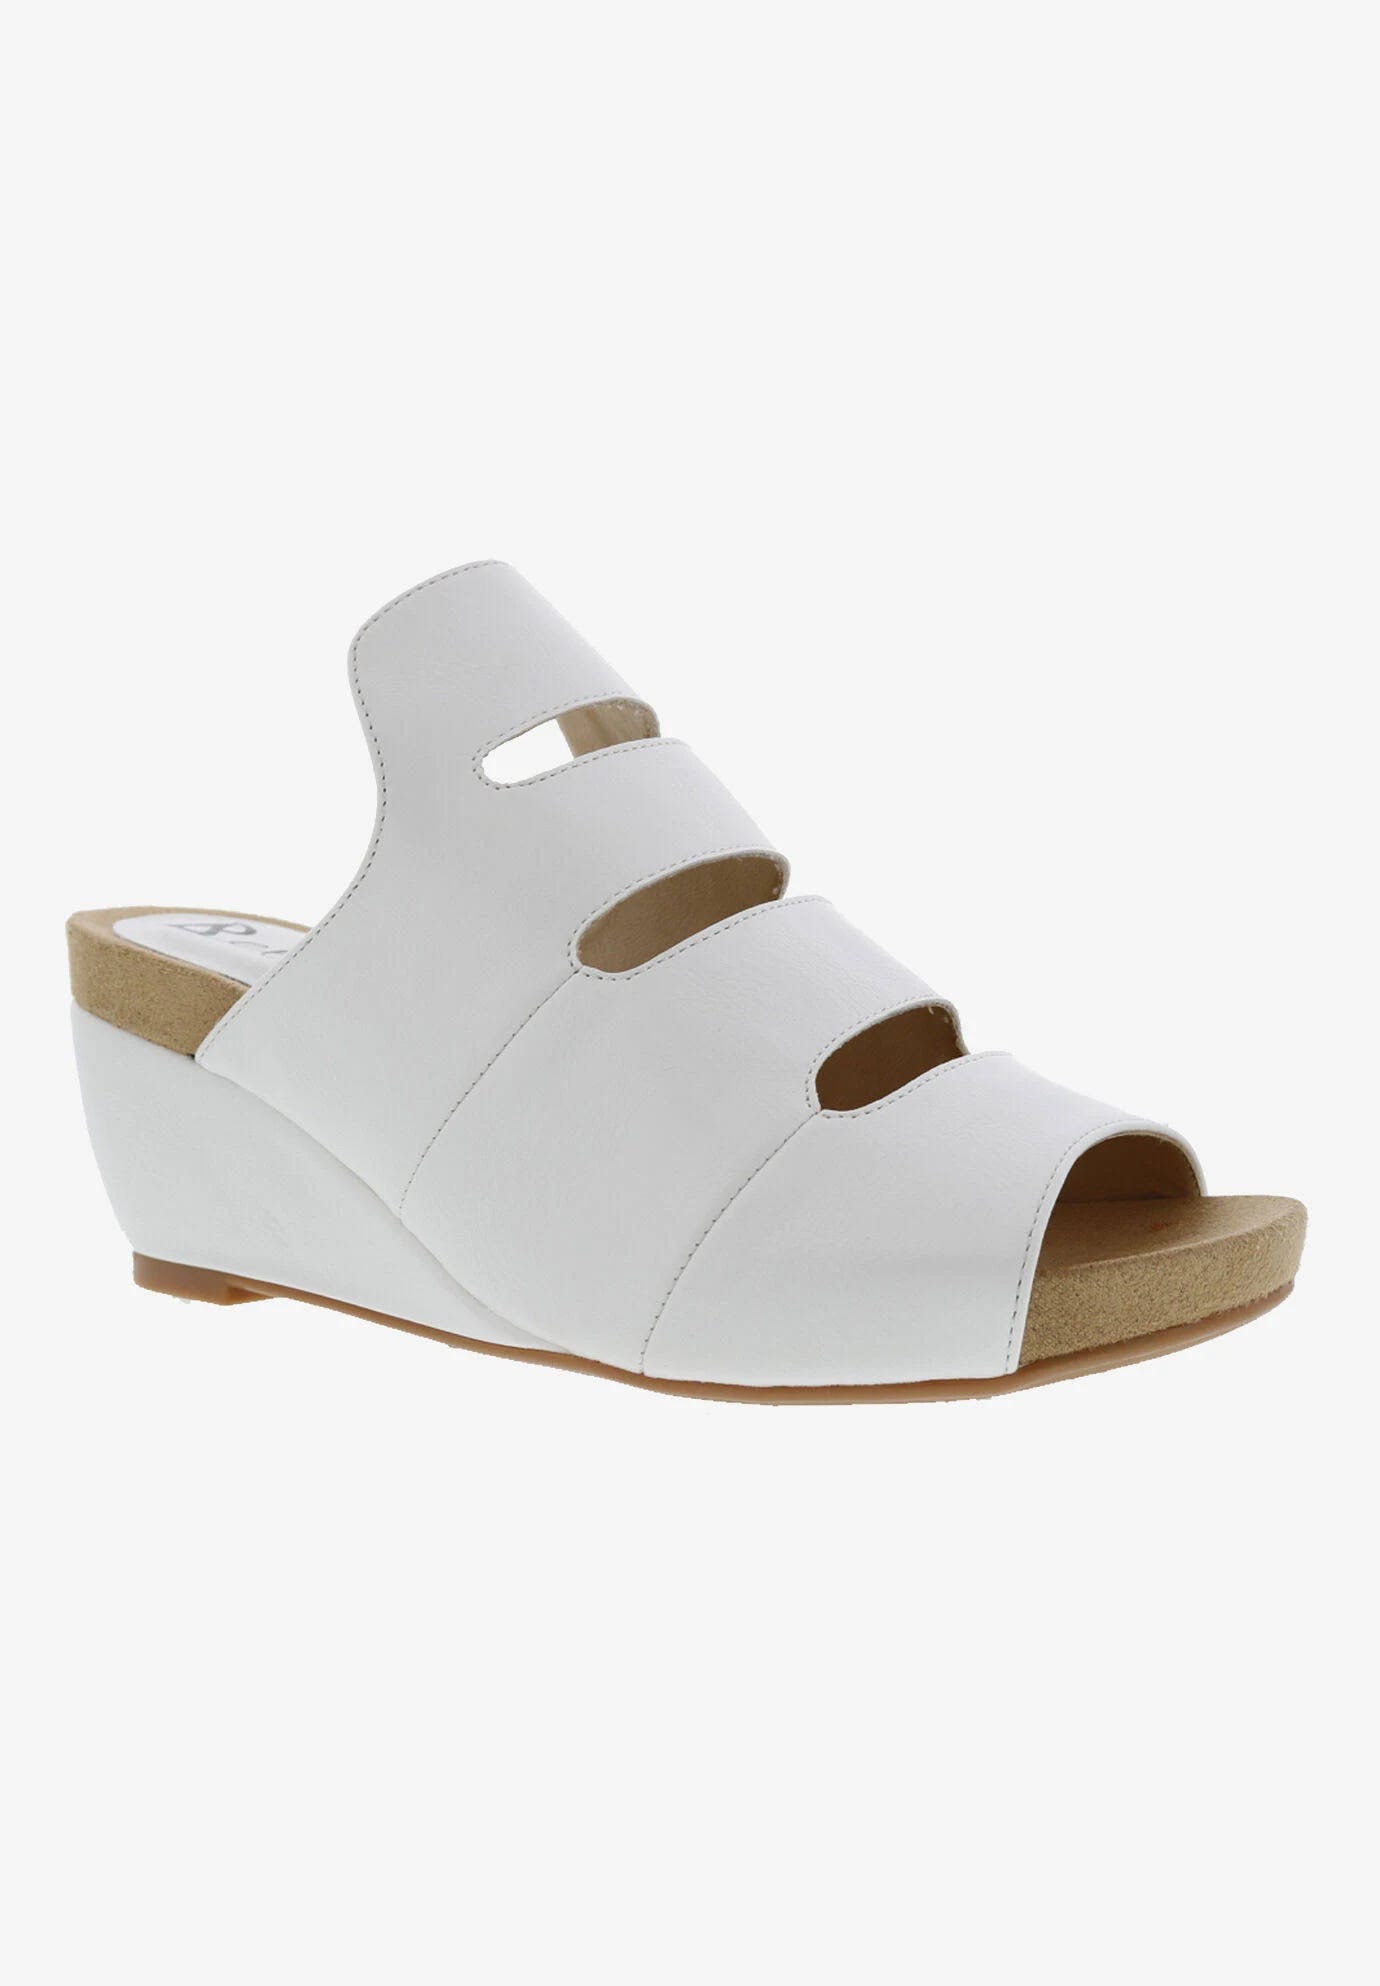 Bellini White Wedge Sandals for Women: Breathable Luxury with Padded Footbed | Image